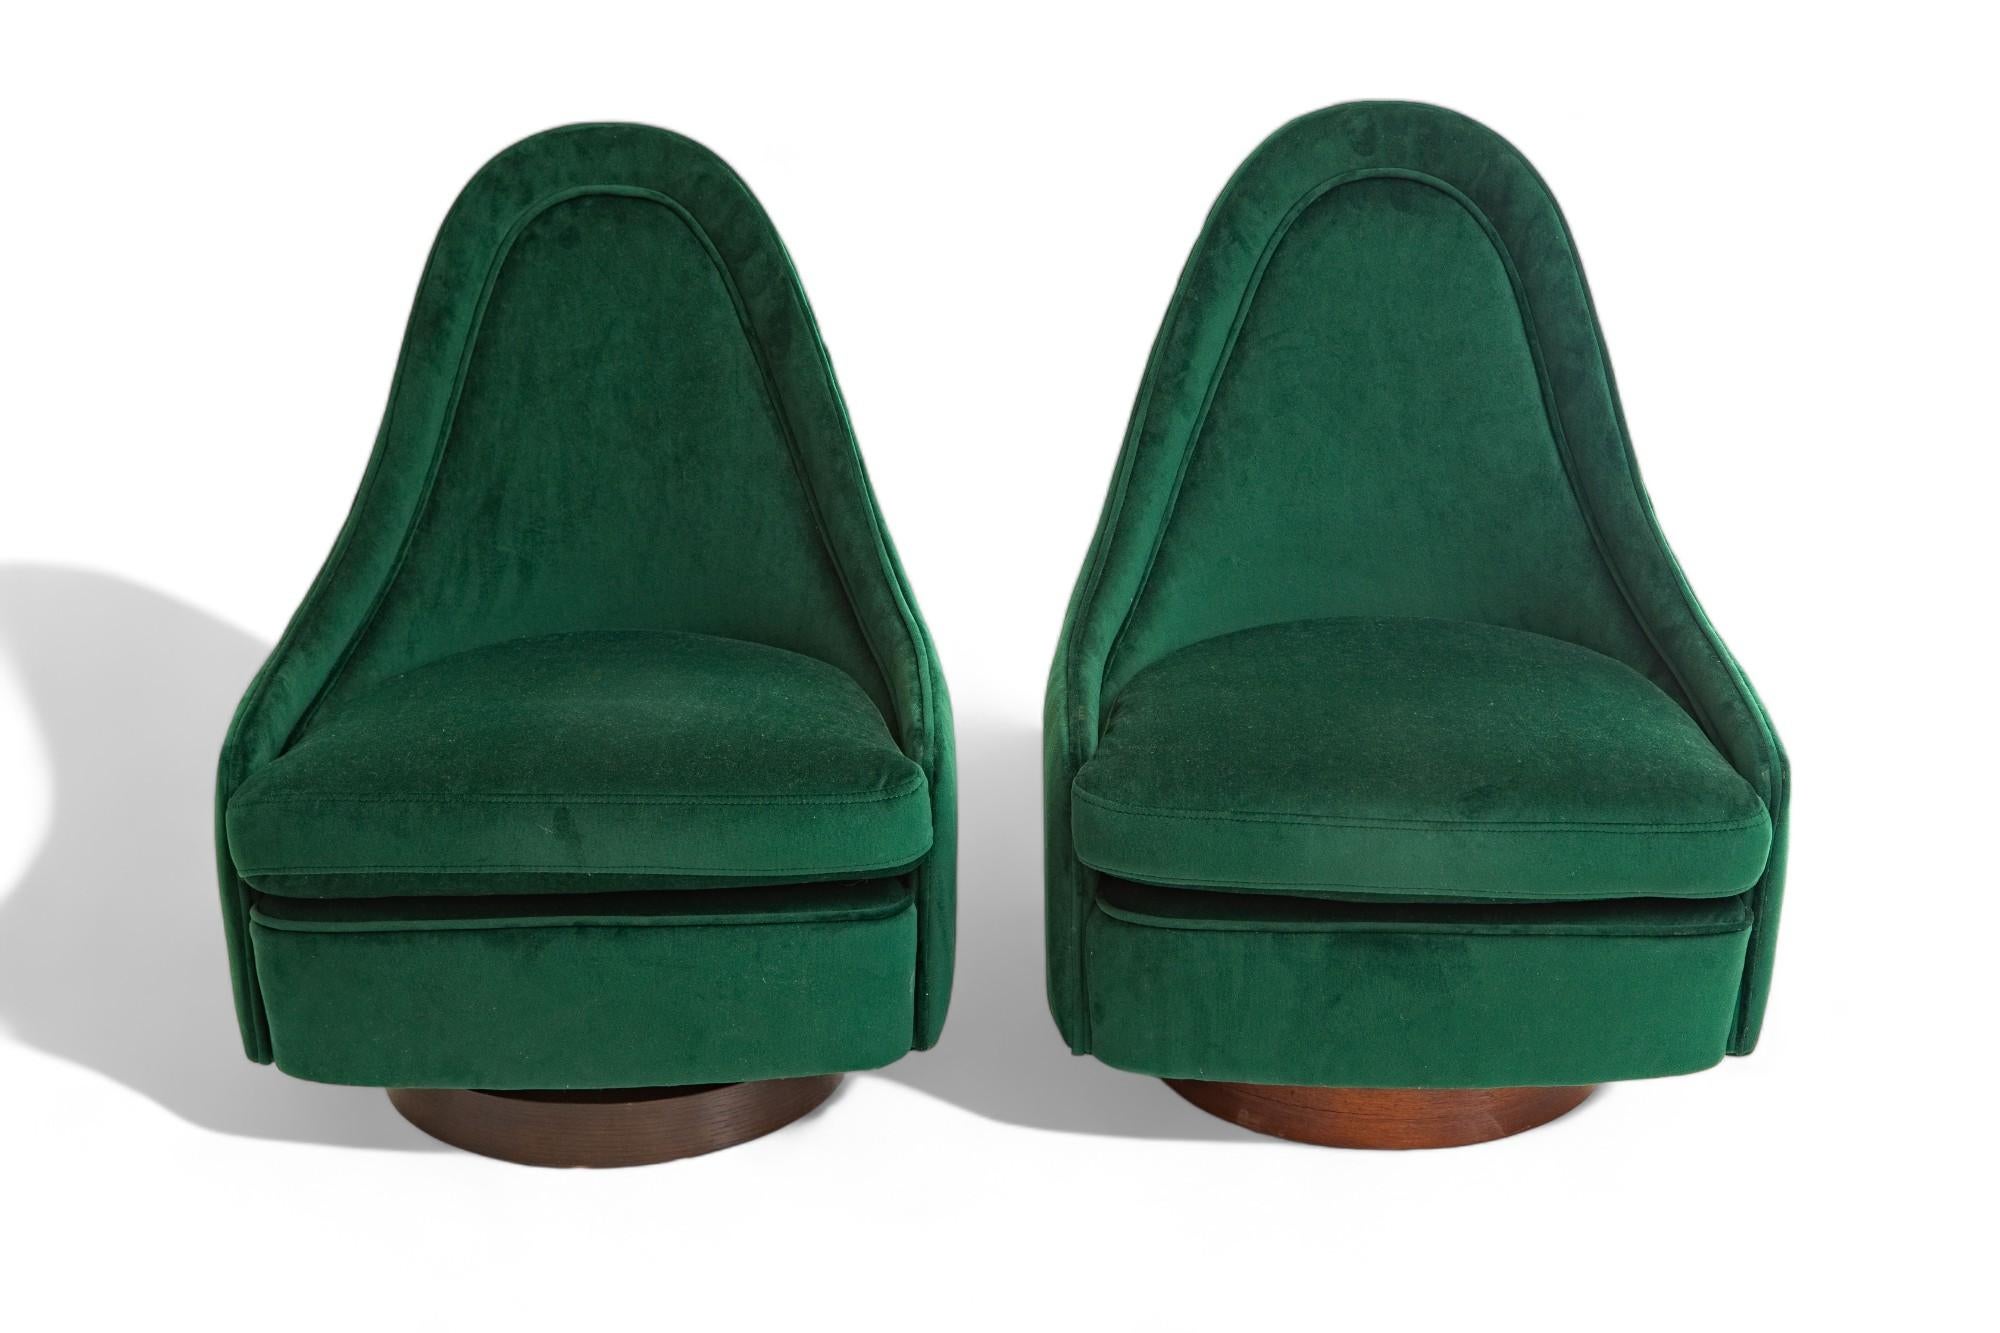 American Mid-Century Modern Petite Tilt and Swivel Lounge Chairs by Milo Baughman For Sale